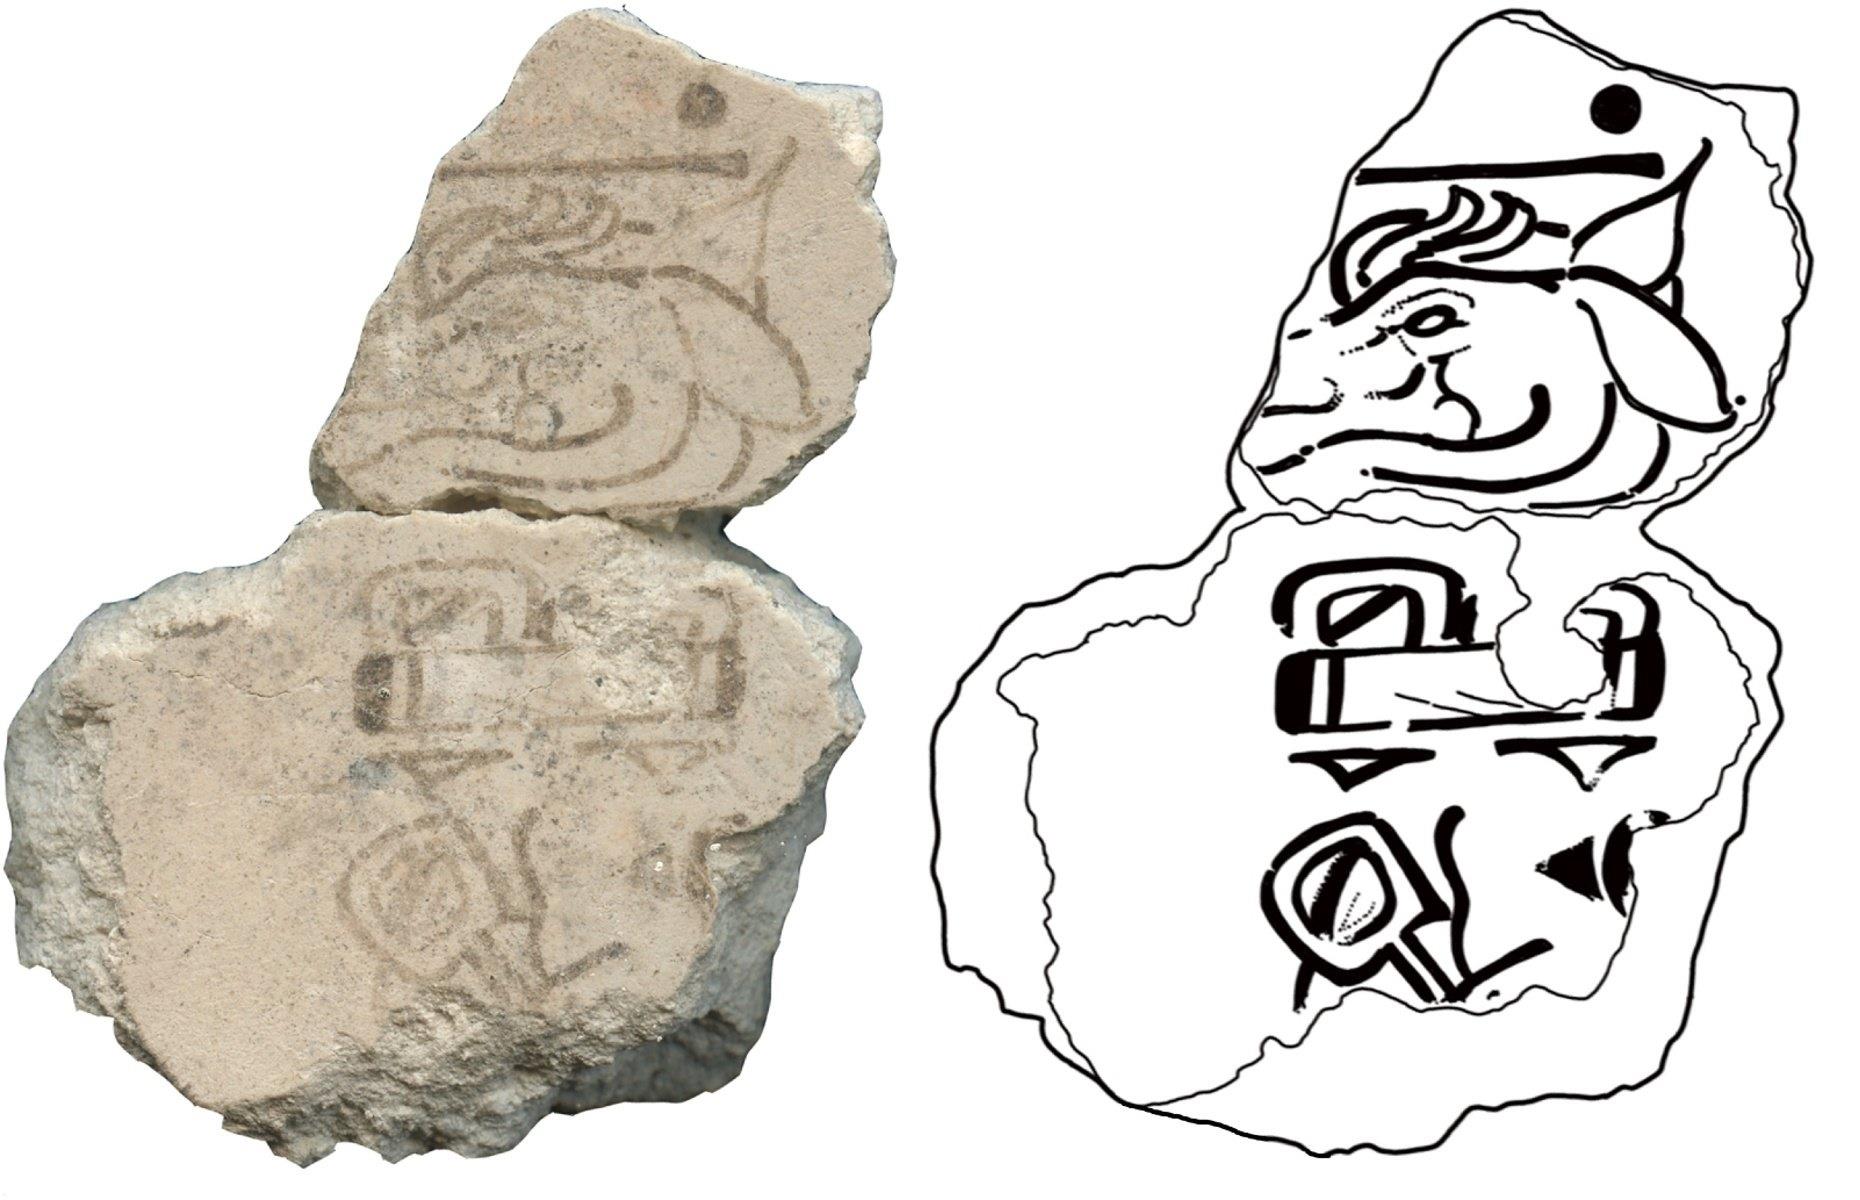 <p>In 2022 archaeologists from the University of Texas and Skidmore College in New York studied murals recently discovered on a pyramid at the ancient Mayan city of San Bartolo. They identified one of the painted fragments as the Mayan date "7 Deer."</p>  <p>It was painted around 250 BC, and represents the earliest known evidence of the Mayan calendar. Exactly why that date was recorded remains a mystery – perhaps it marked an important date in the construction of the pyramid, or an astronomical event.</p>